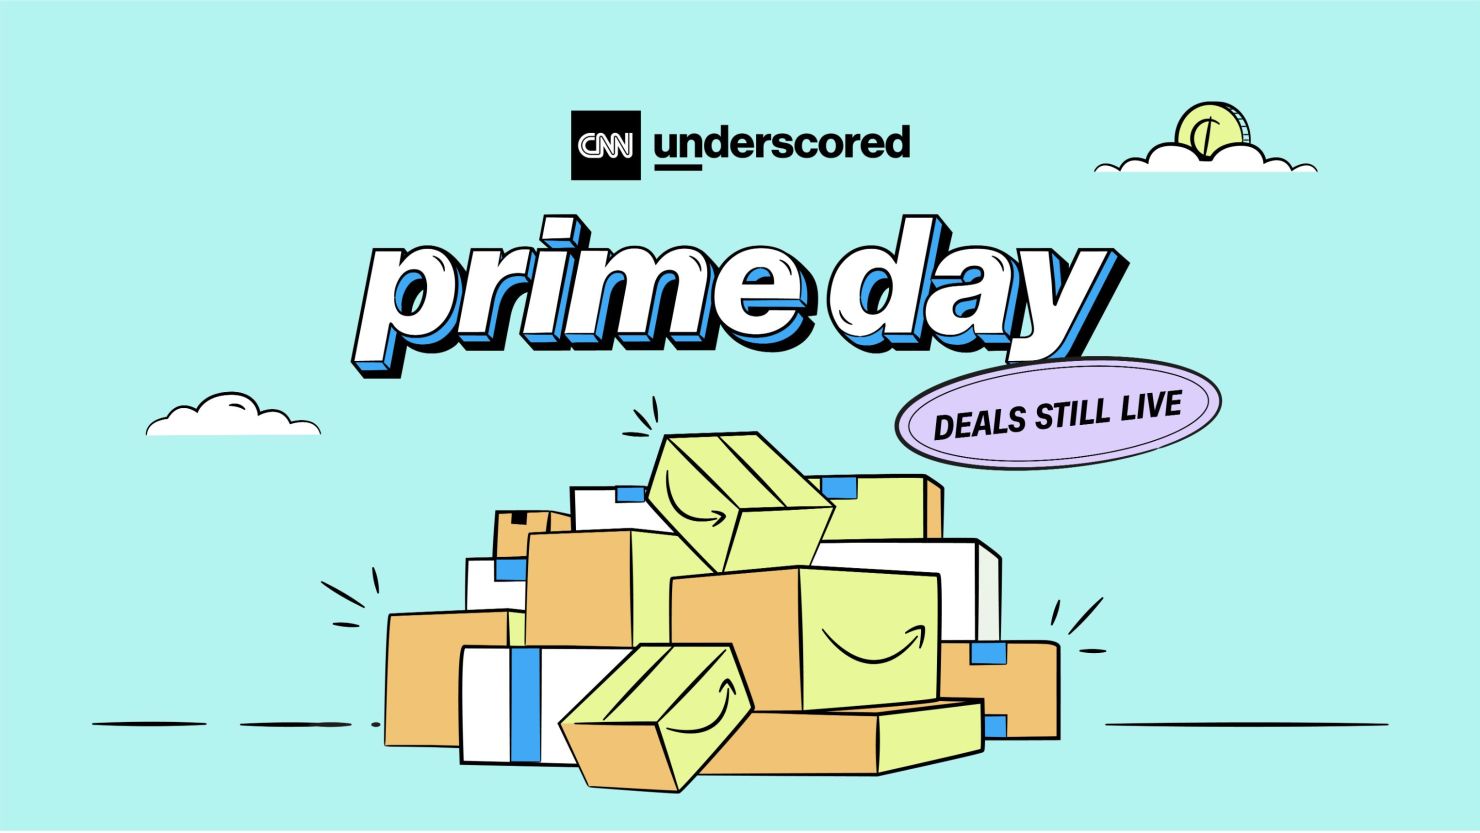 How to get the most out of  Prime Day without overspending